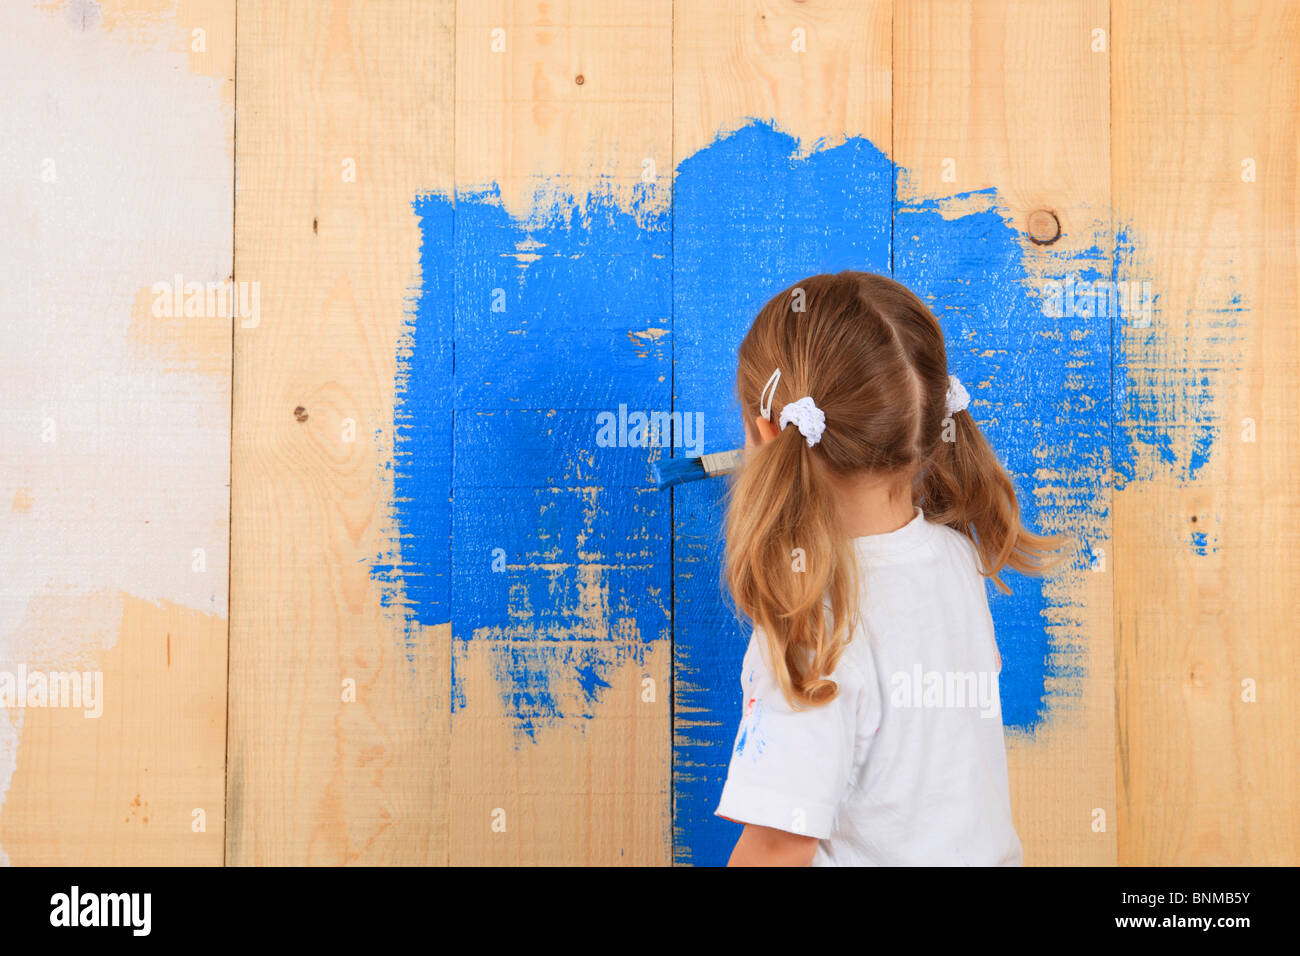 Girls 3 years old 3-year-old board shelf boards shelves wooden wall color paintbrush spot of colour luck happiness wood wooden Stock Photo